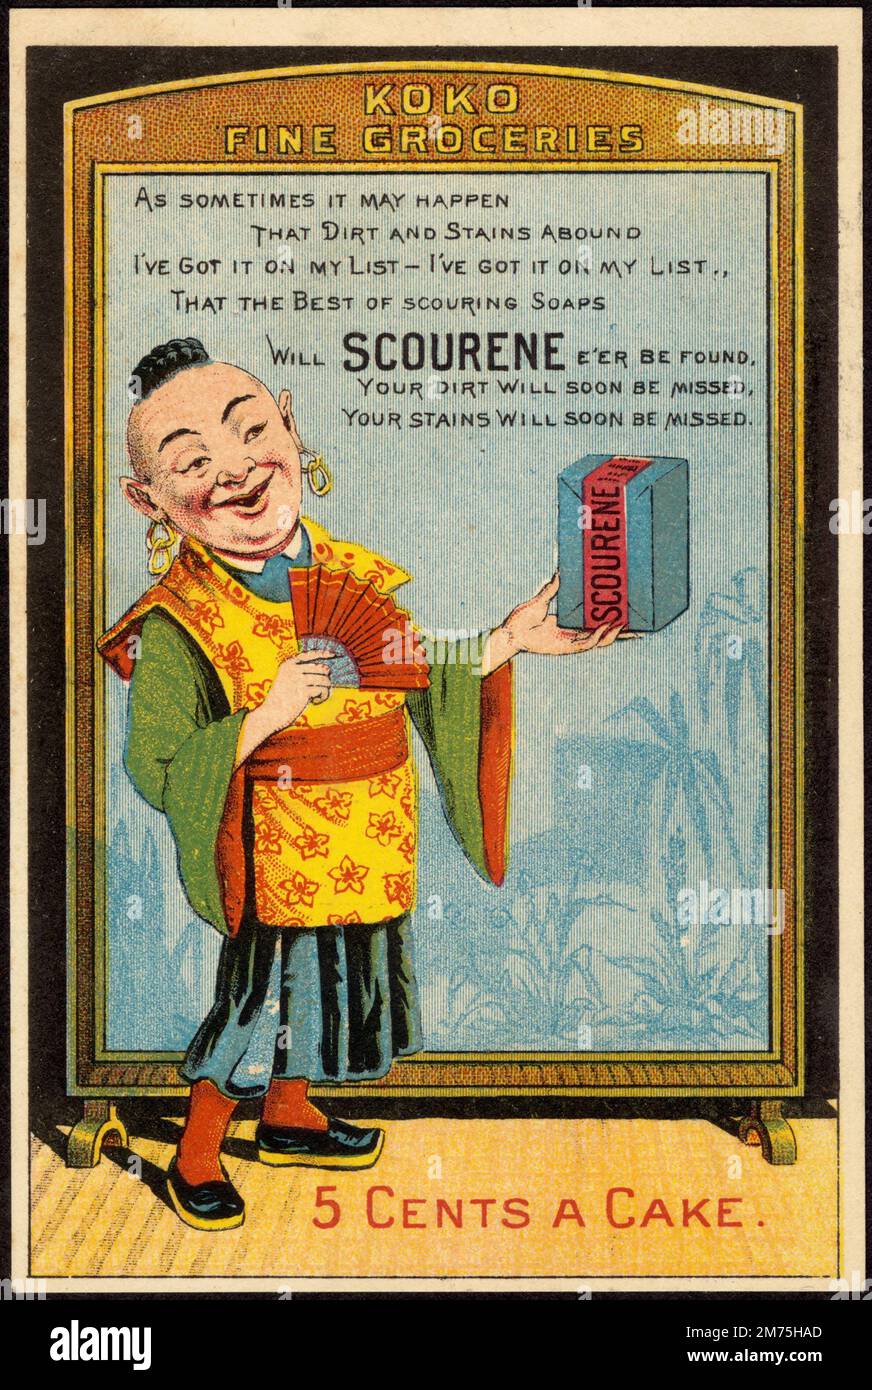 Advertisement for Scourene soap, sold from Koko Fine Groceries, circa 1900 Stock Photo